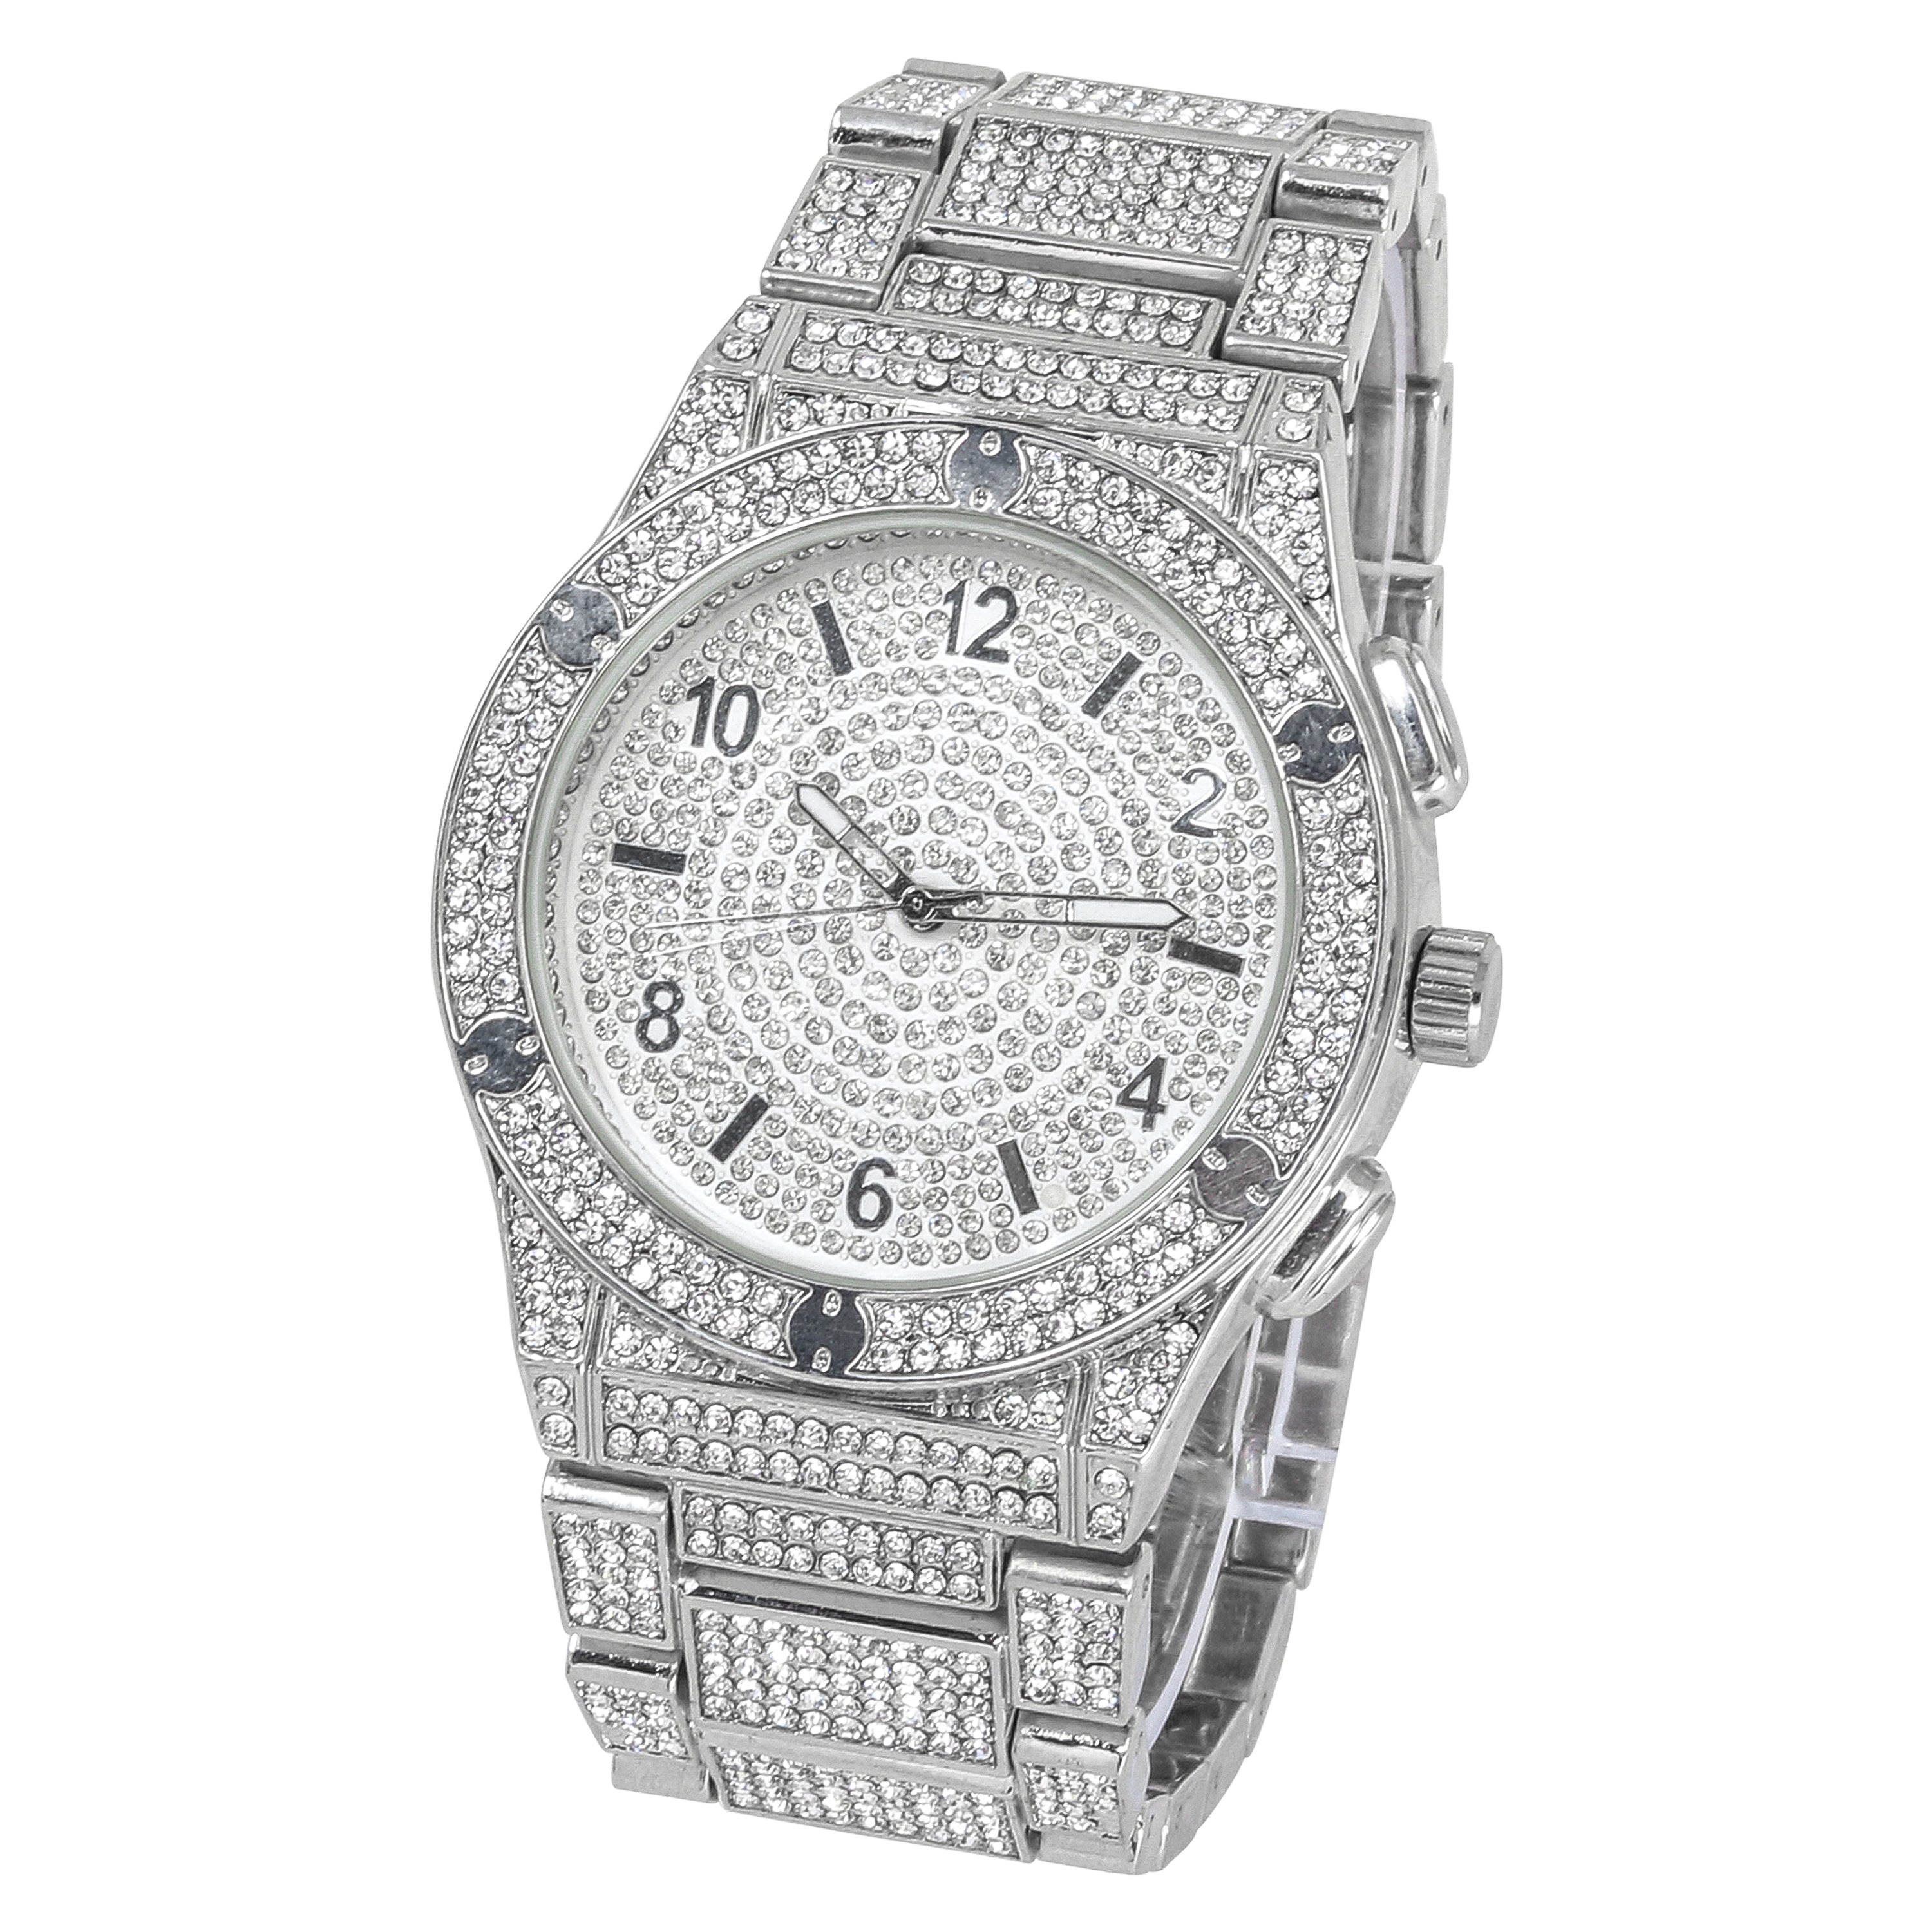 Men's Round Iced Out Watch 42mm Silver - "Fully Iced Band"